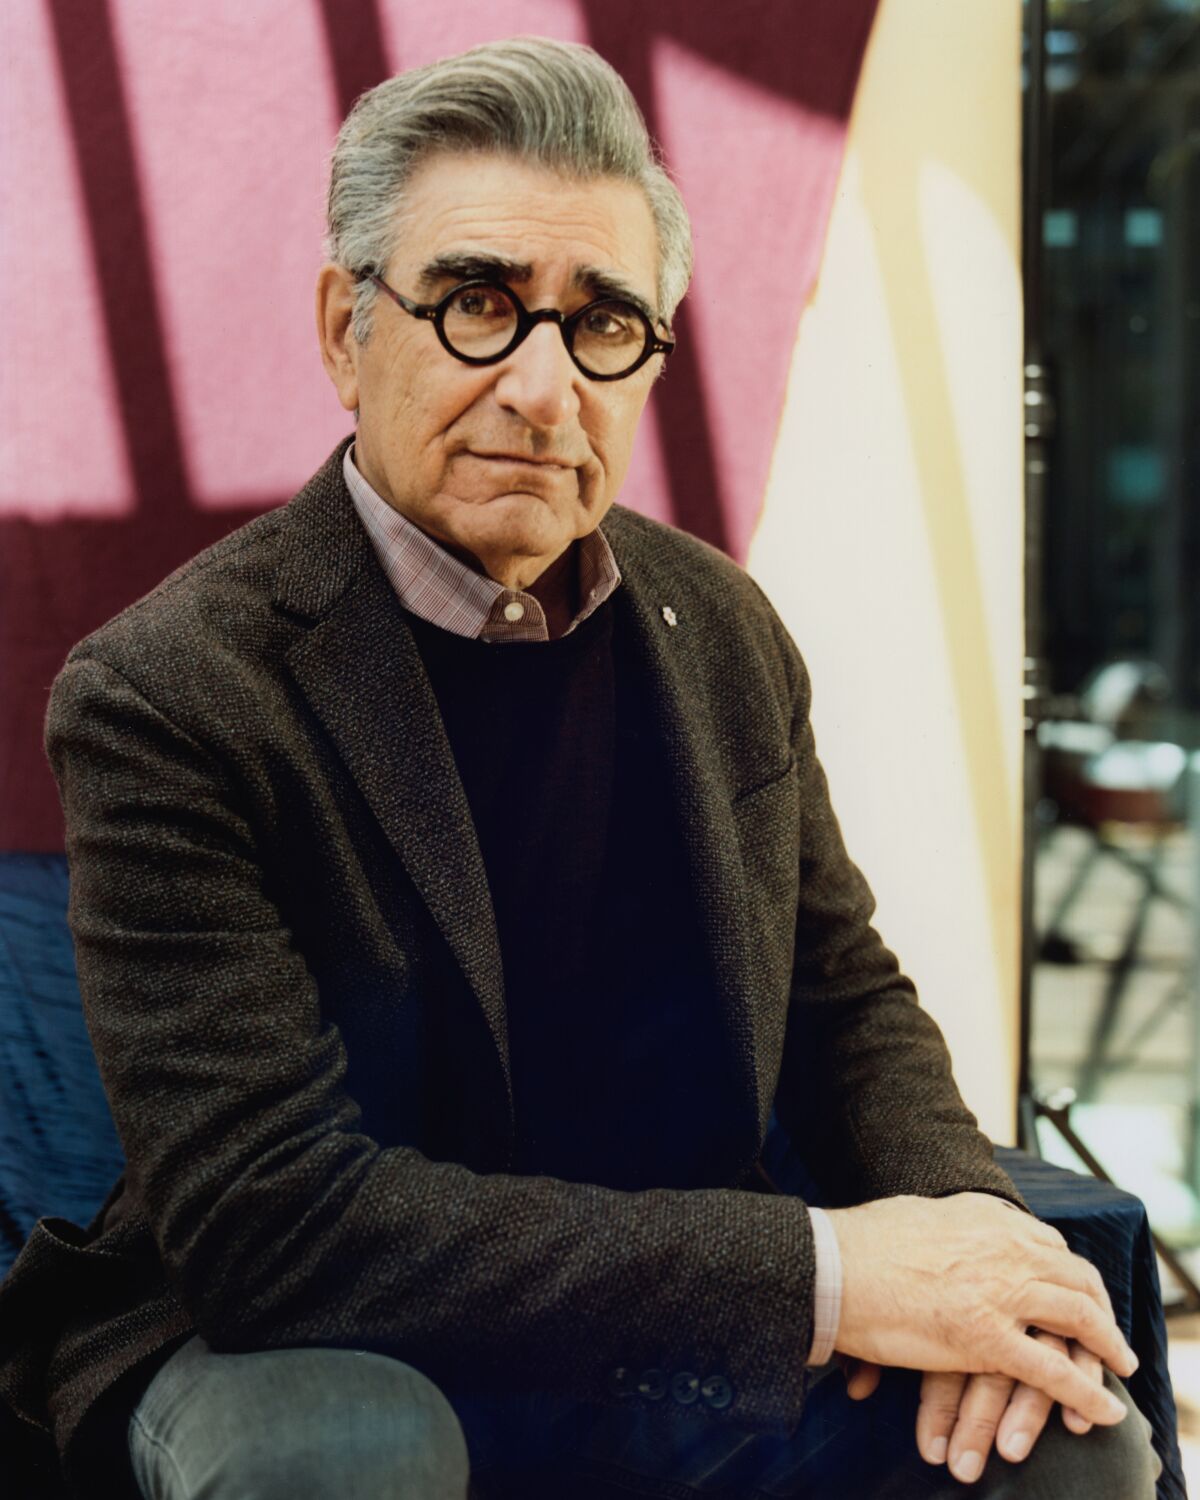 Eugene Levy travels the world -- whether he wants to or not